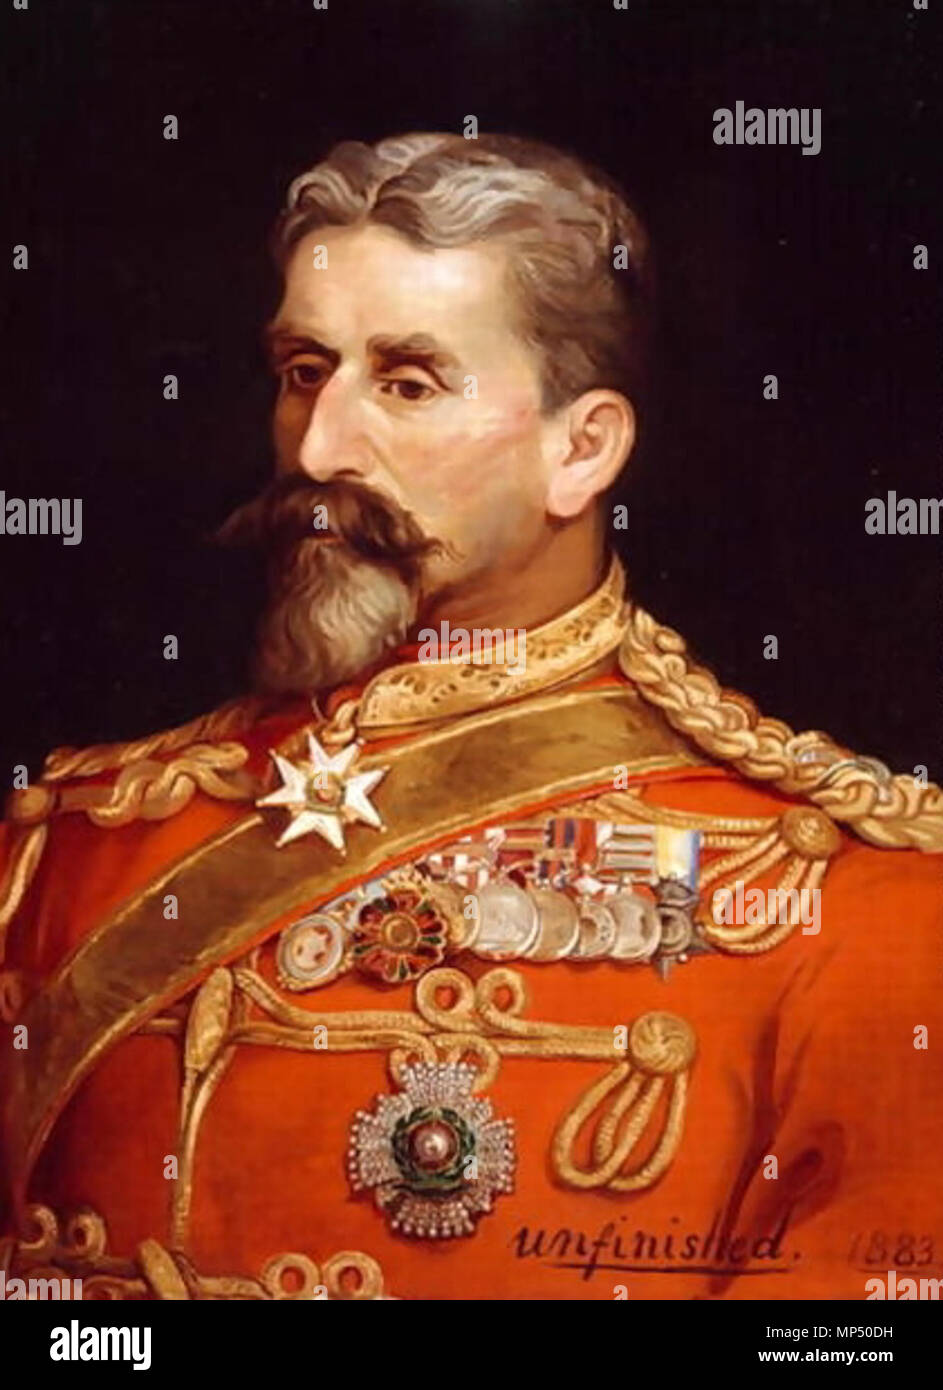 . English: Maj. Gen., Sir Charles MacGregor (1840-1887); born at Agra on 12 August 1840; the son of Major Robert MacGregor of the Bengal Artillery and an Indian woman; educated at Marlborough College he returned to India in 1856 as a subaltern in the Bengal Artillery. During the Indian Mutiny (1857-1859), MacGregor took part in the relief and capture of Lucknow. He was twice wounded during the campaign. After service in China, Butan and Abyssinia he was appointed Quartermaster General on the Khyber communication lines and commanded the 3rd Brigade of the Kabul-Kandahar field force at the Battl Stock Photo